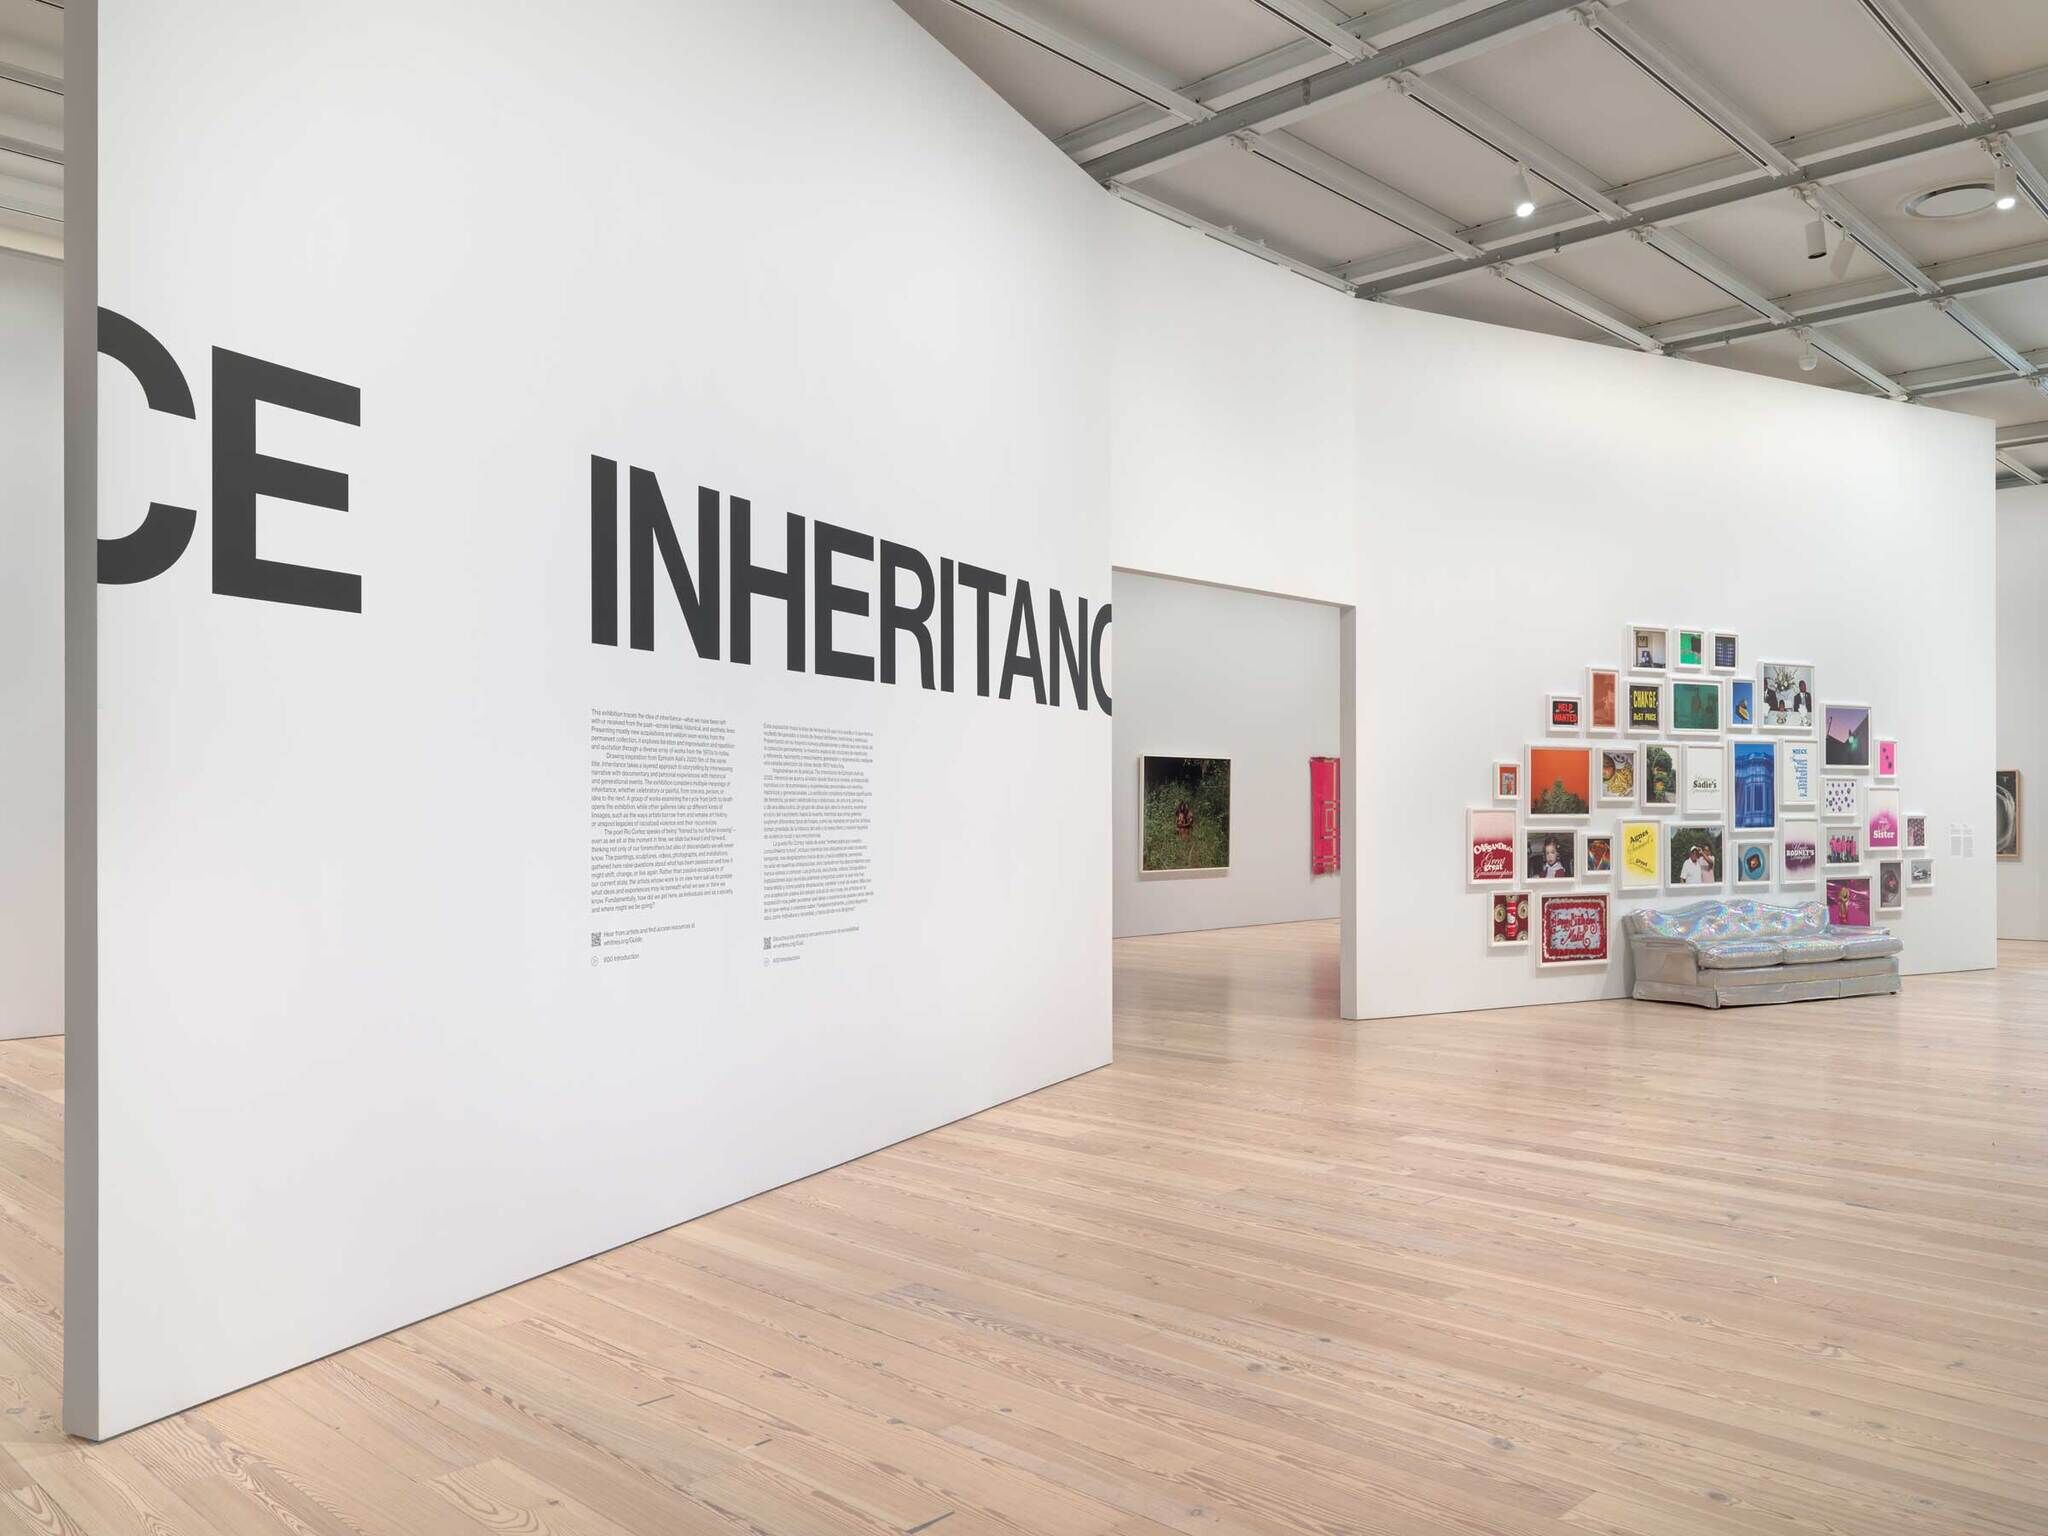 A wall with "Inheritance" in big letters with a smaller description text. To the right, an iridescent silver couch with a framed photographs above it in rainbow colors.